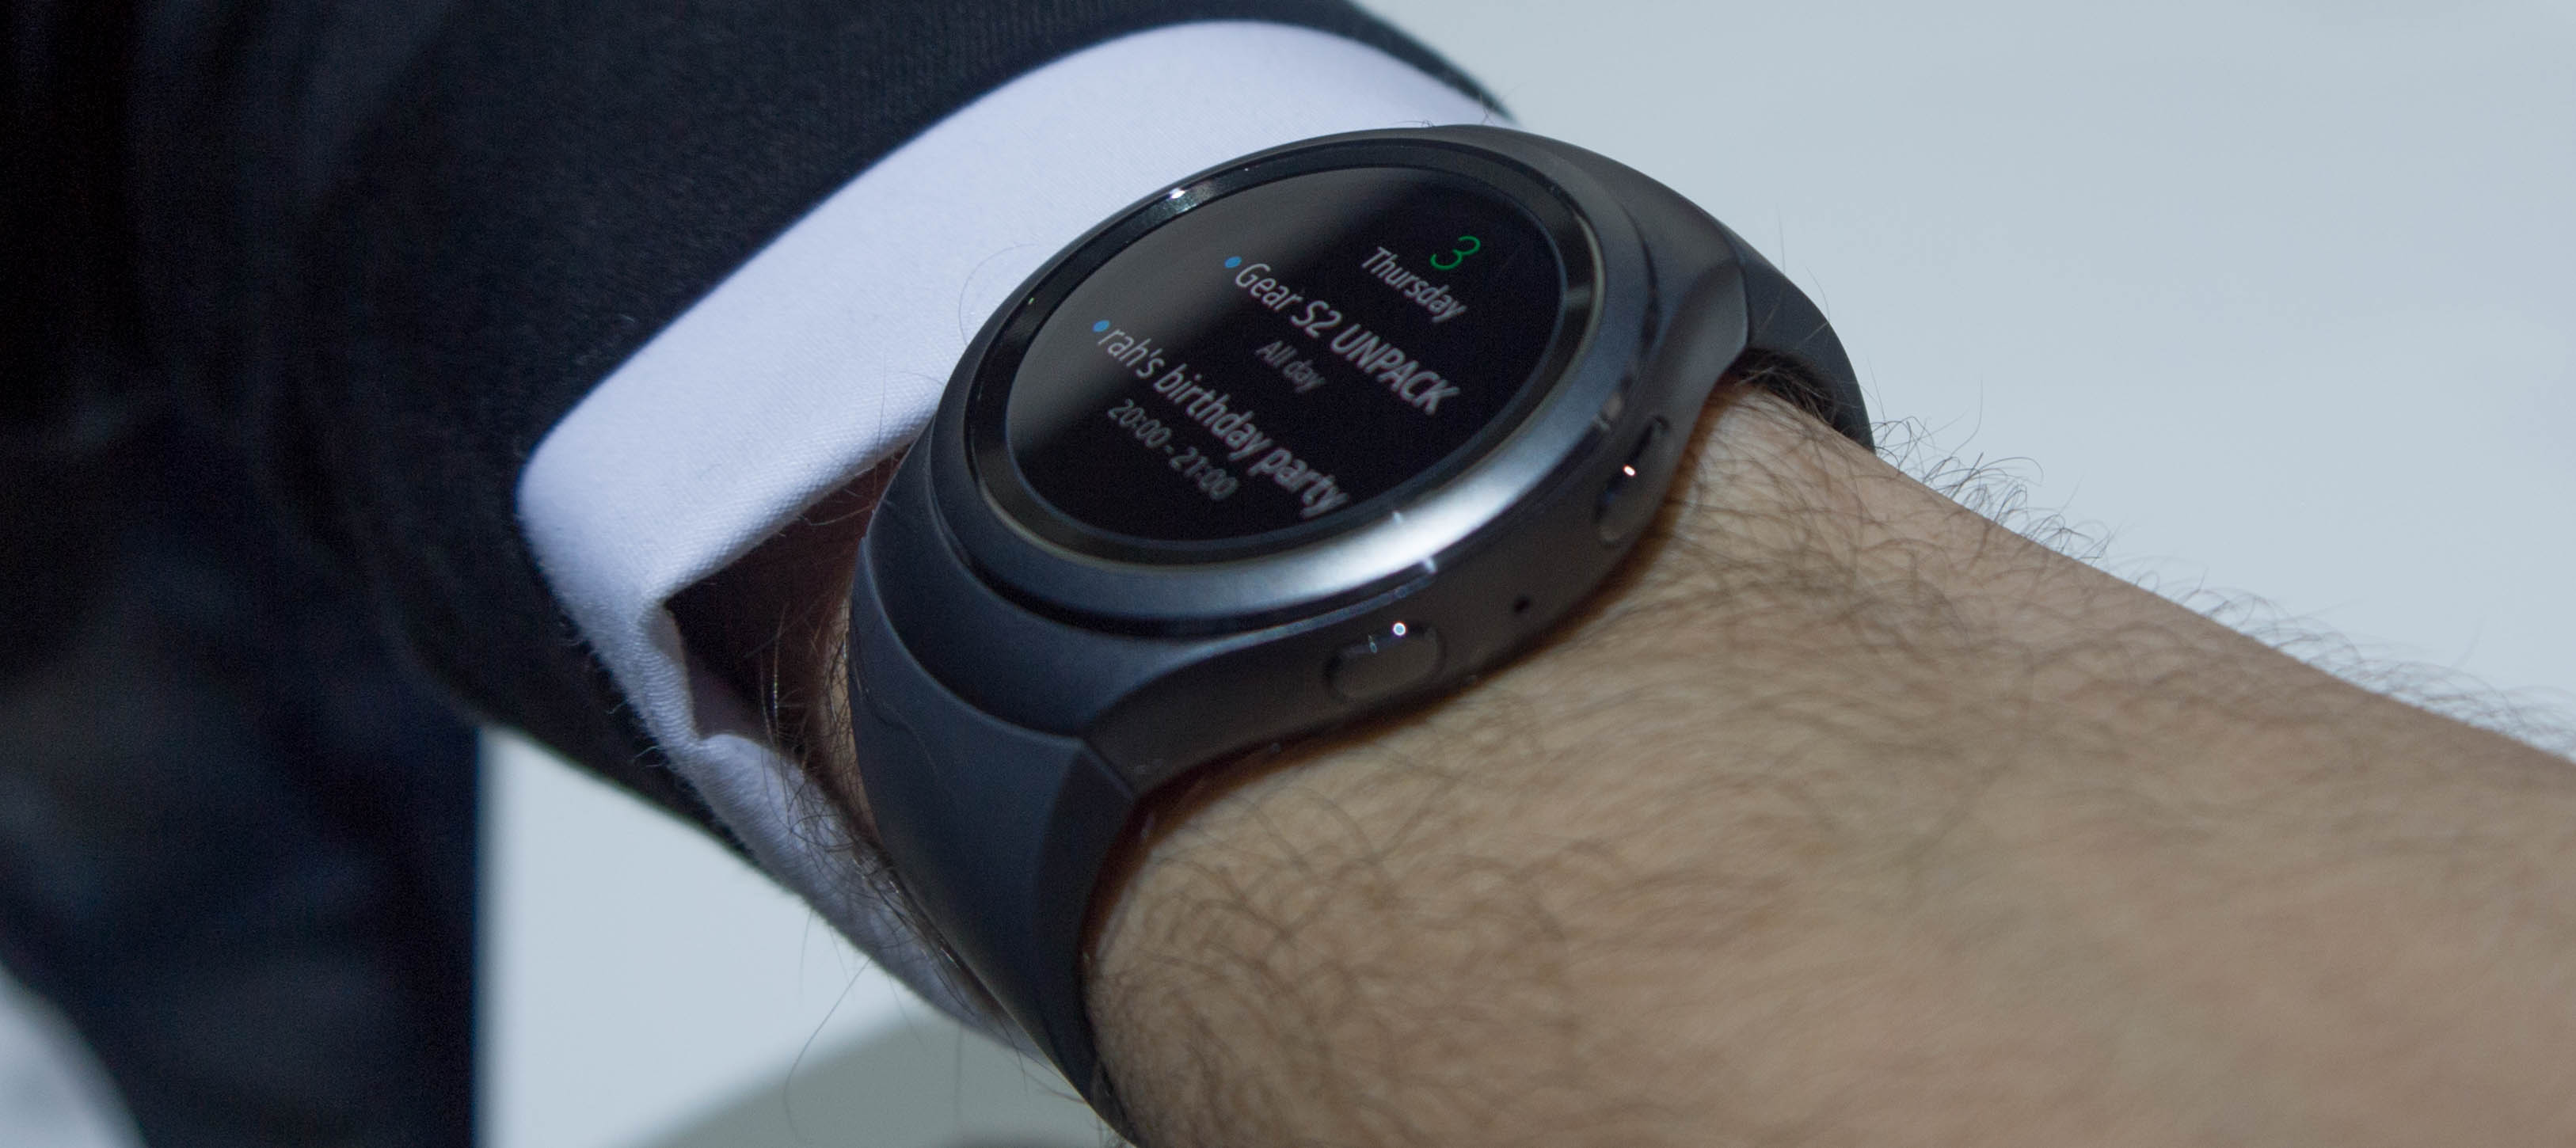 Samsung Gear S2 Launch Event & Hands-On